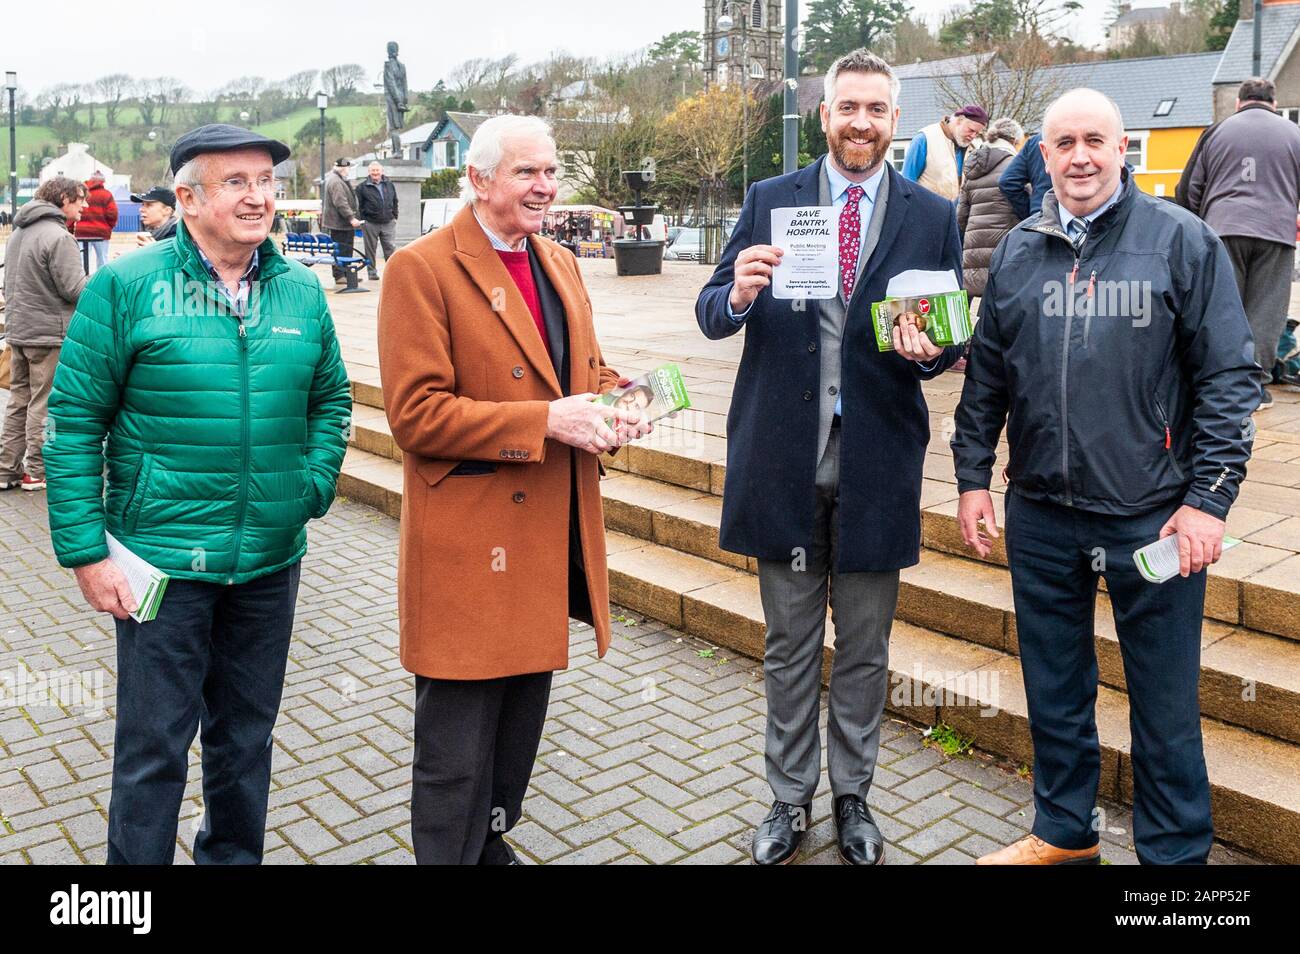 Bantry, West Cork, Ireland. 24th Jan, 2020. Election candidate Cllr. Christopher O'Sullivan was in Bantry Market today, canvassing for votes with his team. Credit: Andy Gibson/Alamy Live News Stock Photo